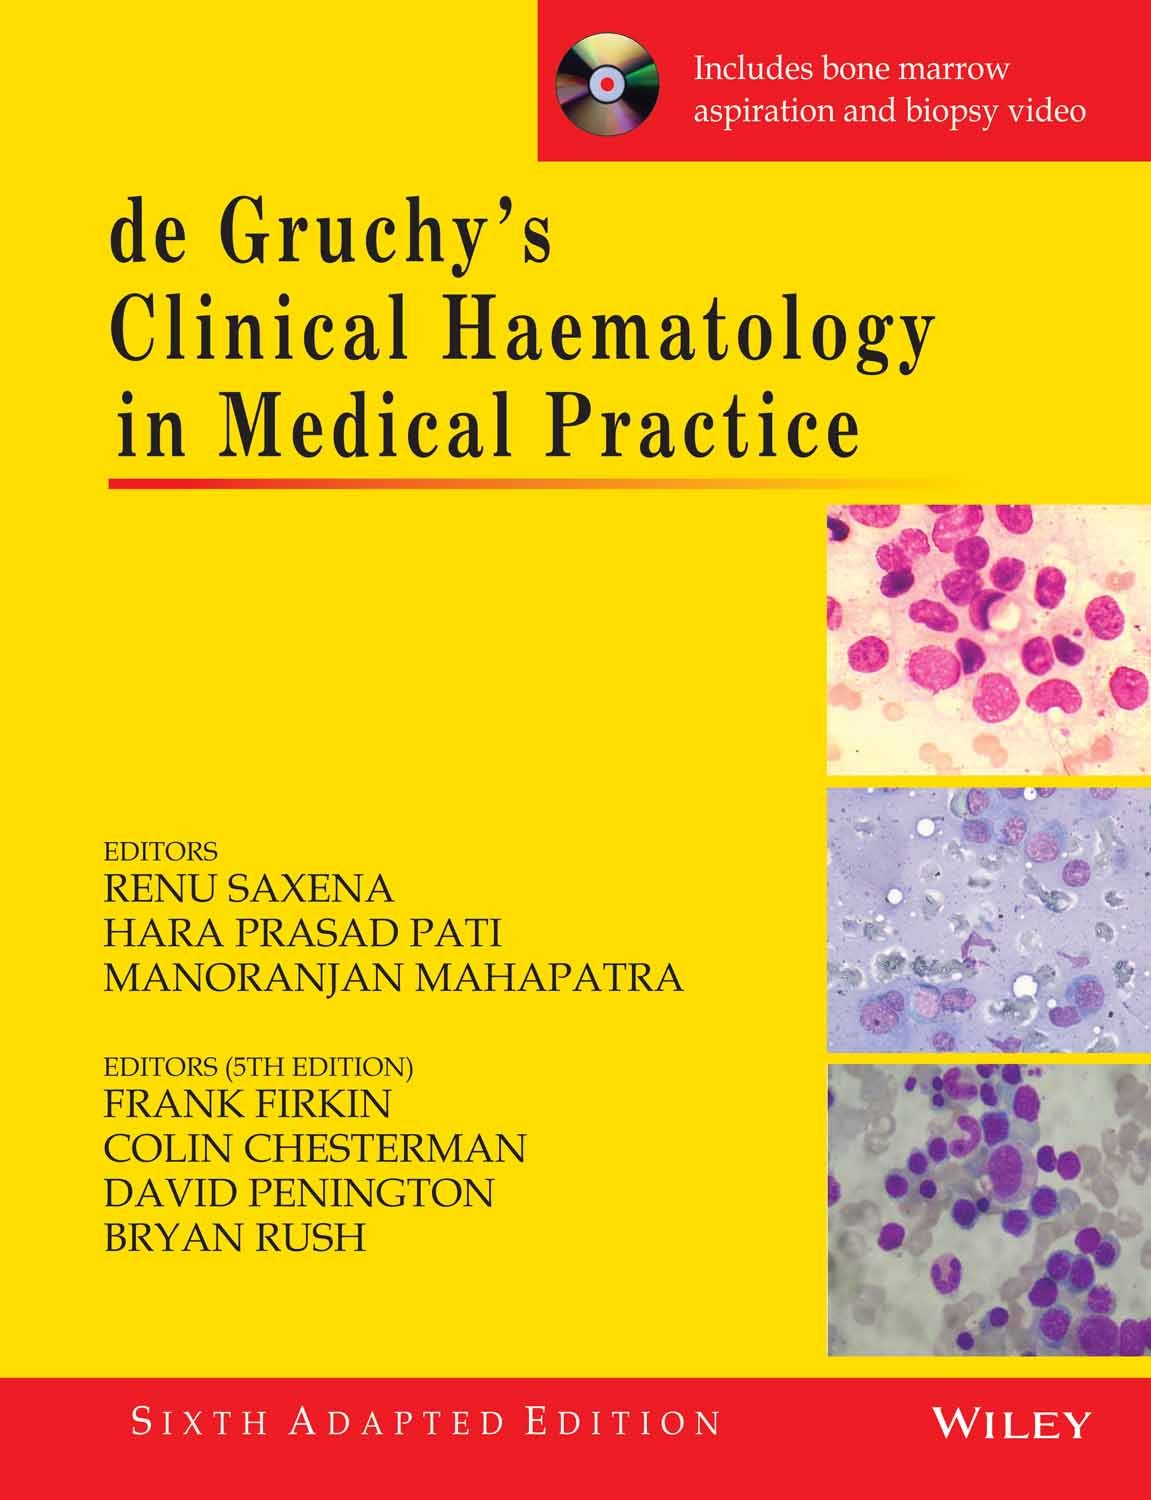 de-gruchys-clinical-haematology-in-medical-practice-6e-with-cd-pb